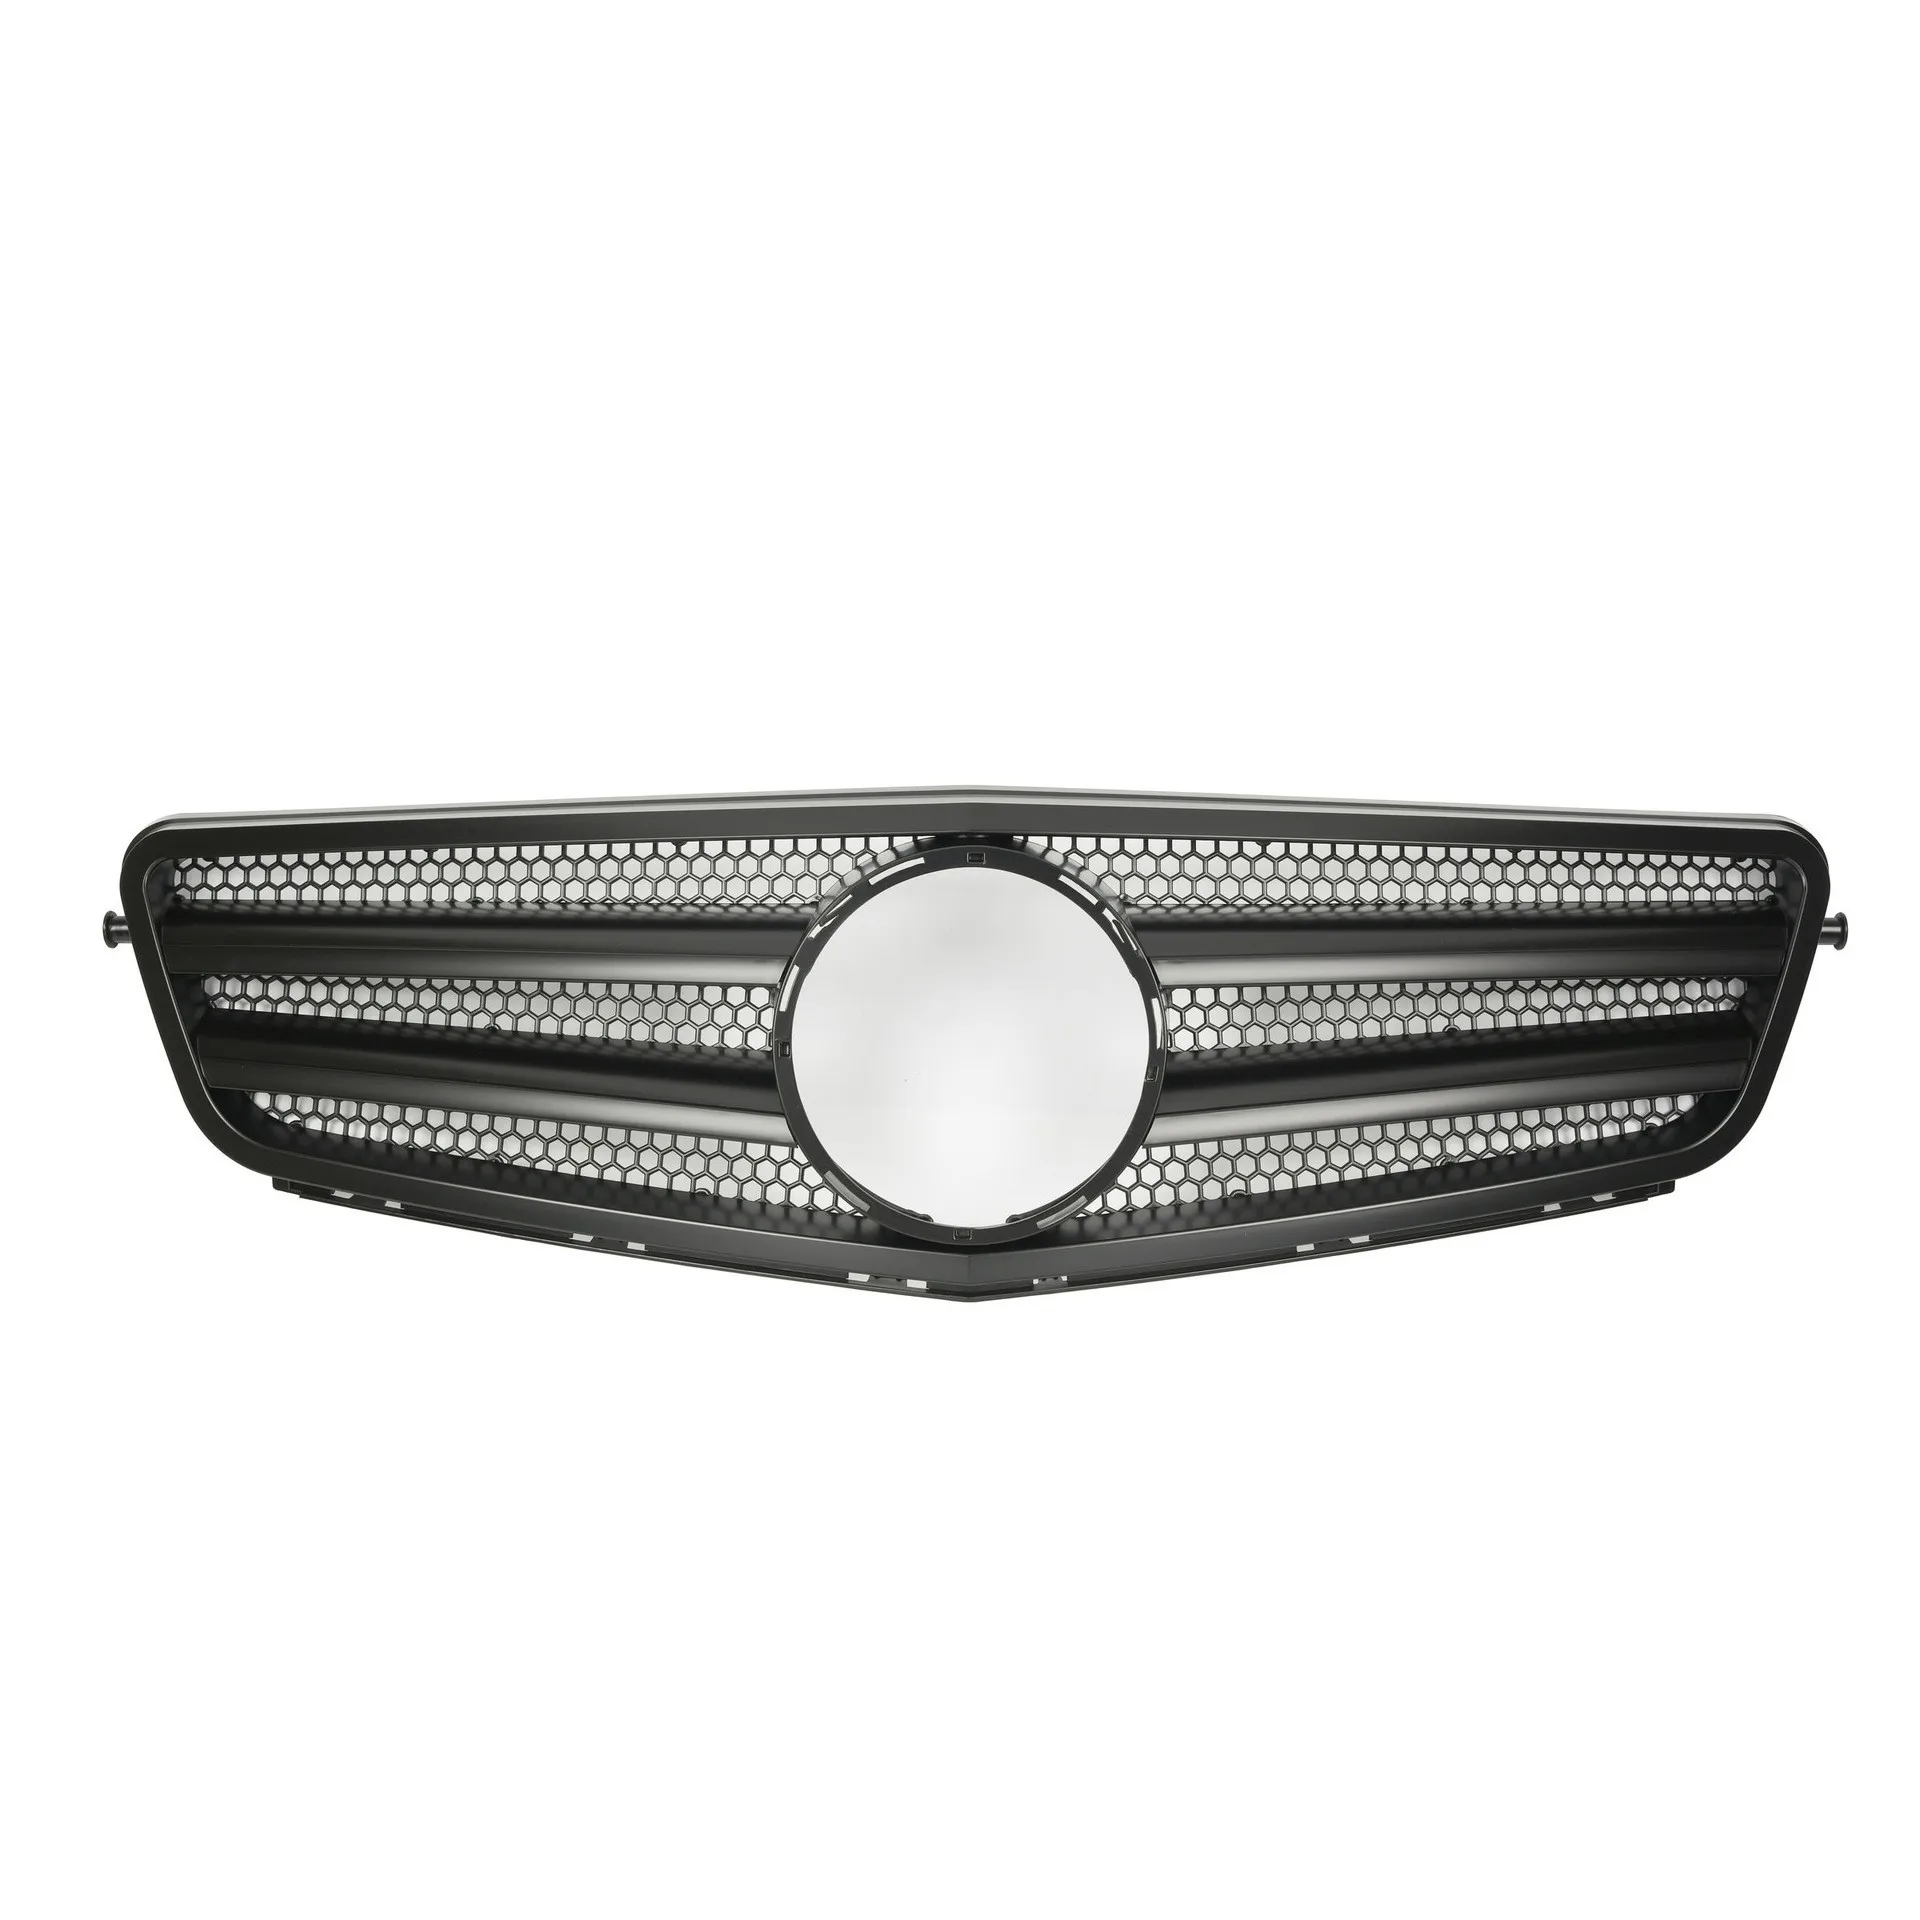 

Perfect Match Front Bumper Grille Hood Grill For Mercedes Benz C W204 C43 2007-2014 C180 C200 C250 C300 AMG GT Diamond Tuning